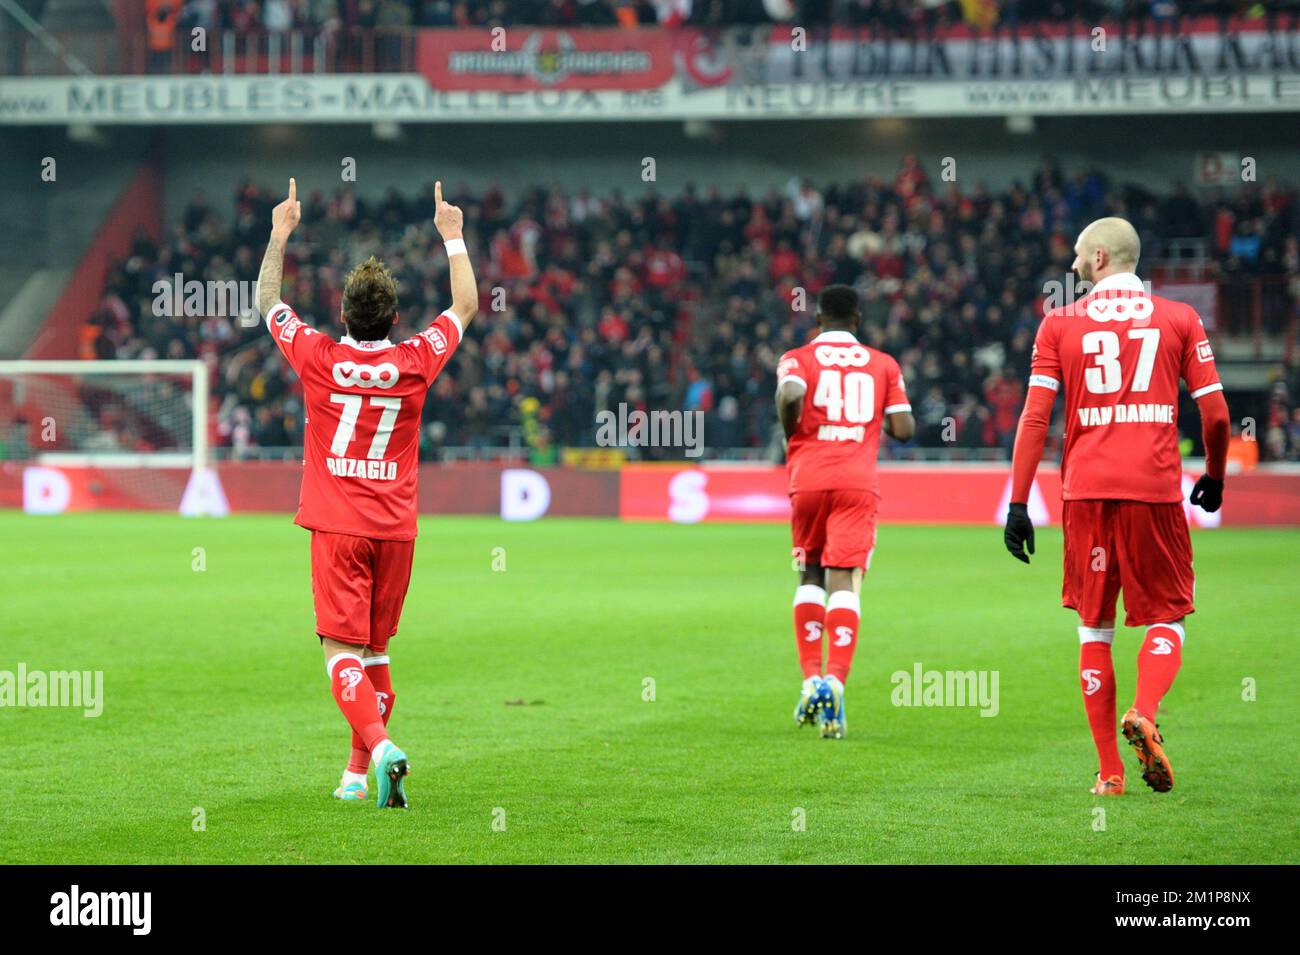 20121207 - LIEGE, BELGIUM: Standard's Maor Bar Buzaglo (L) celebrates after scoring the 3-0 goal during the Jupiler Pro League match between Standard and Charleroi, in Liege, Friday 07 December 2012, on day 19 of the Belgian soccer championship. BELGA PHOTO YORICK JANSENS Stock Photo